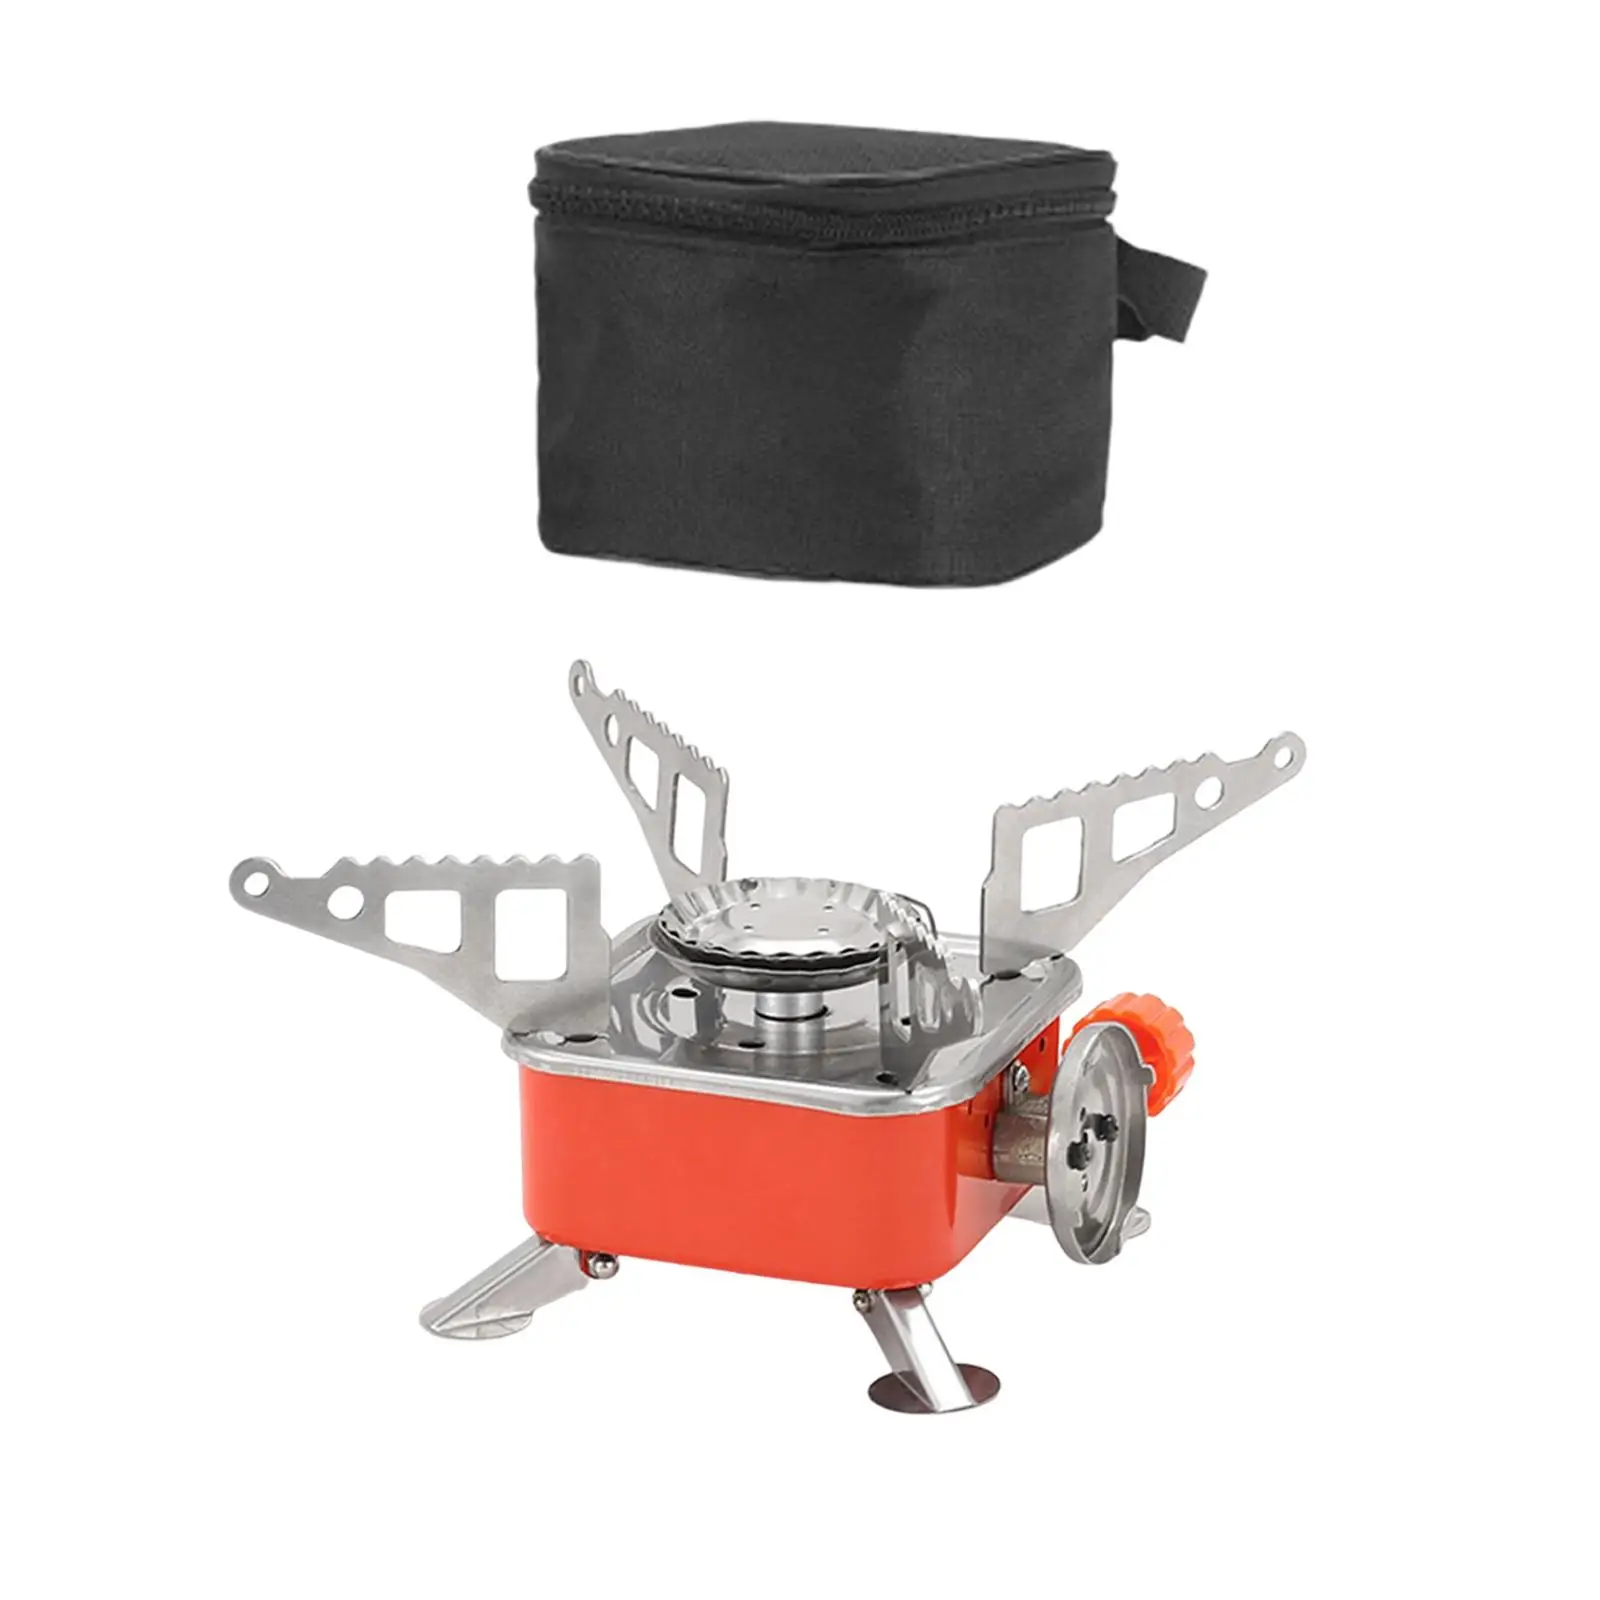 Camping Gas Stove with Storage Case, Camp Stove for Backpacking Fishing Outdoor Picnic Hiking